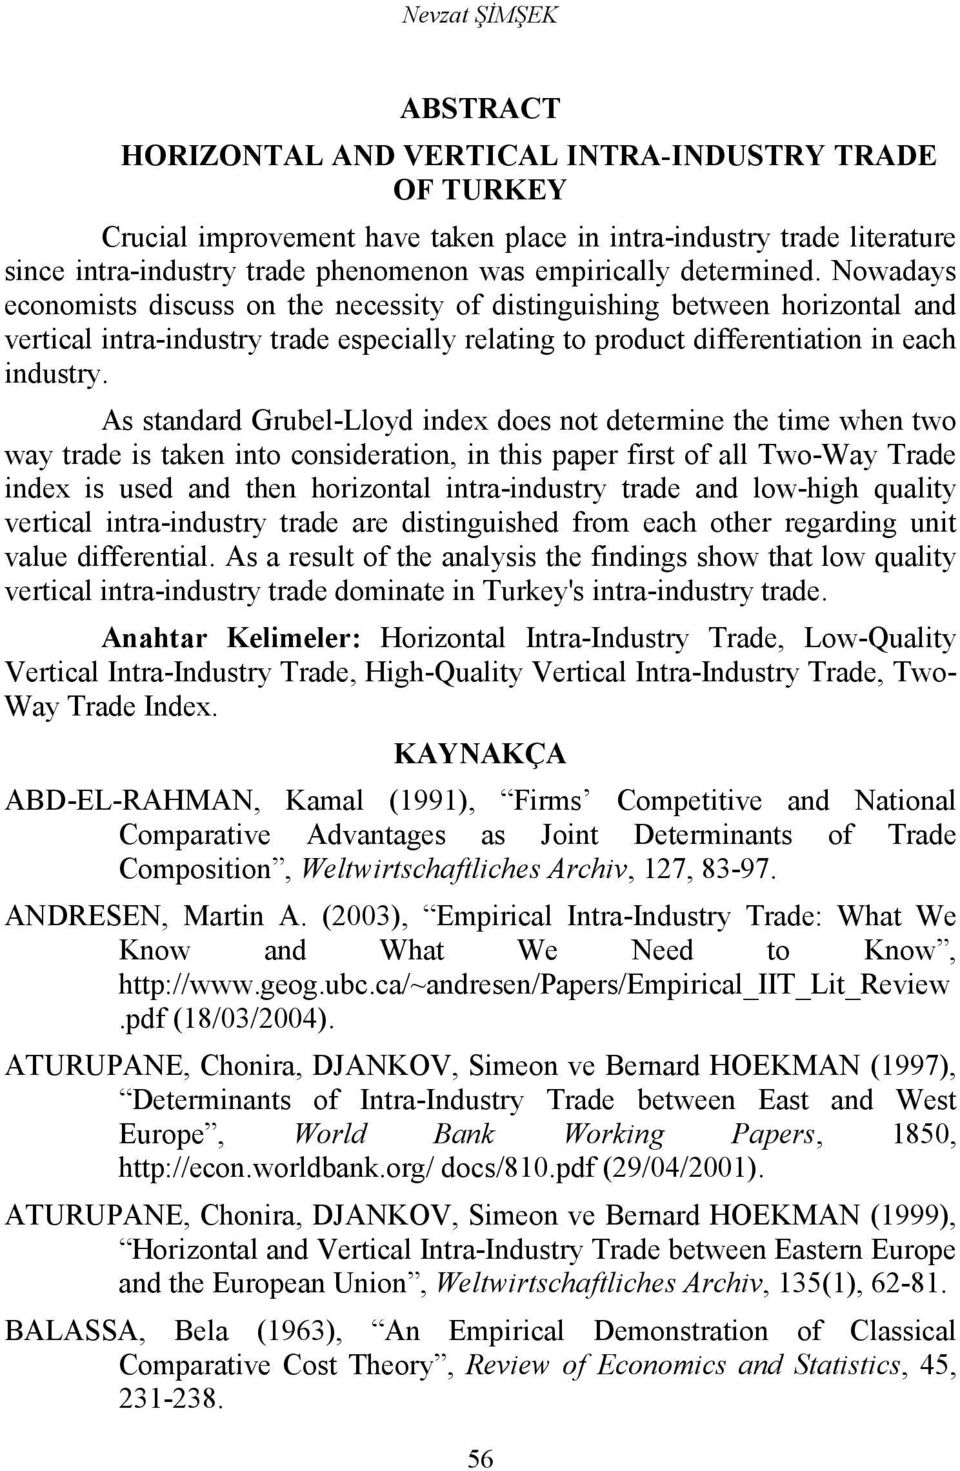 As sandard Grubel-Lloyd index does no deermine he ime when wo way rade is aken ino consideraion, in his paper firs of all Two-Way Trade index is used and hen horizonal inra-indusry rade and low-high